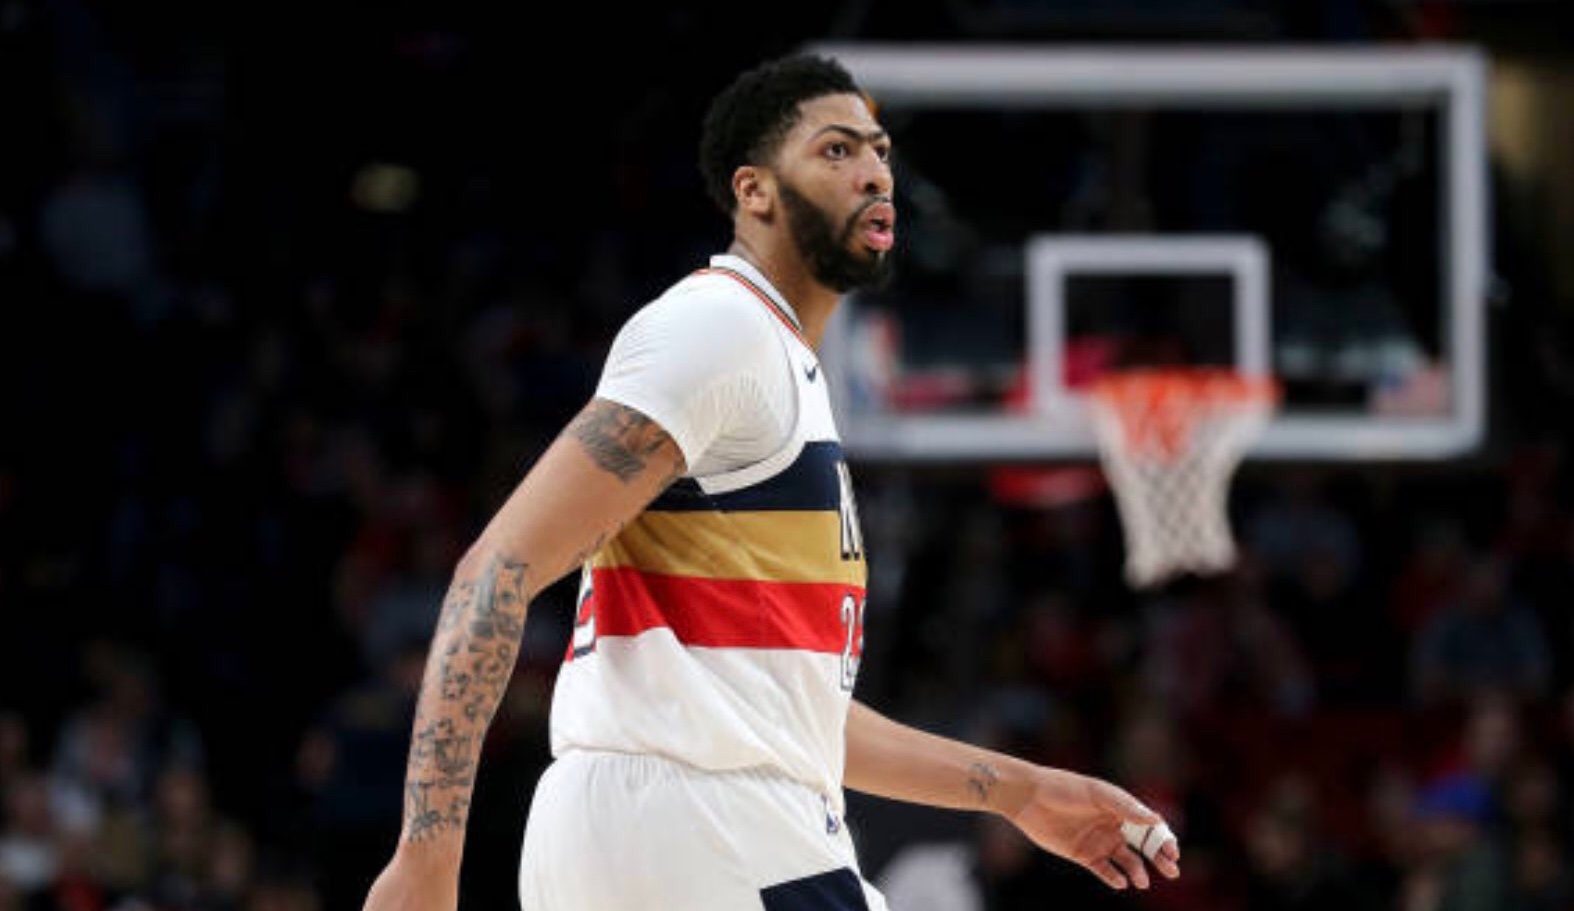 Anthony Davis will see reduced playing time with Pelicans